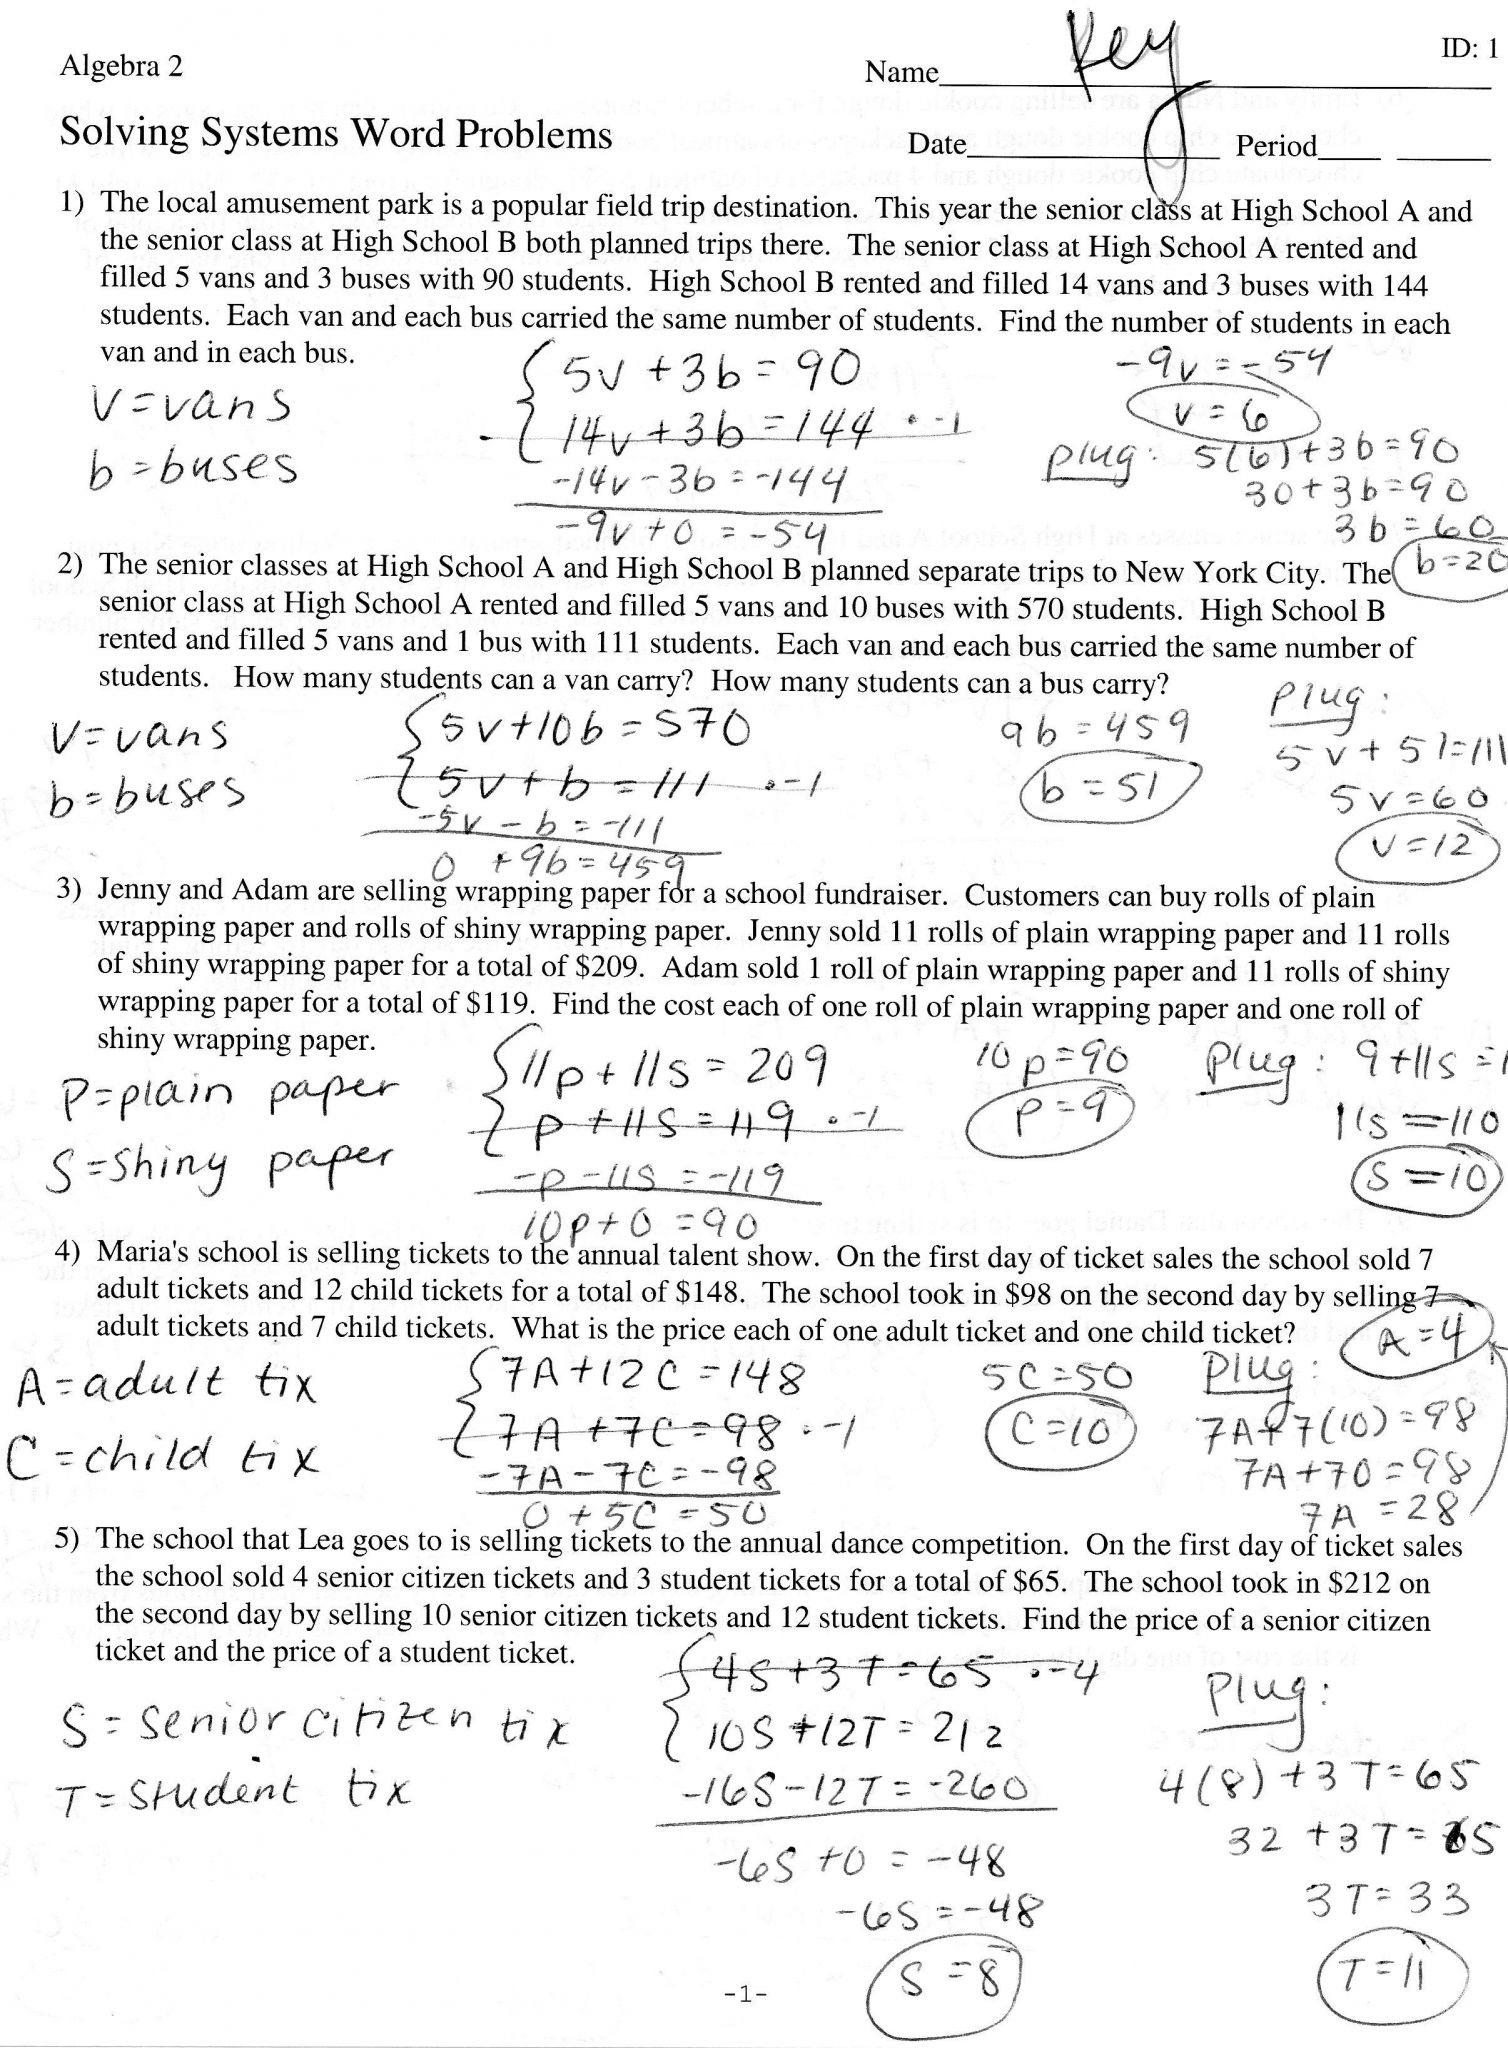 30 Systems Of Linear Equations Word Problems Worksheet Worksheet 